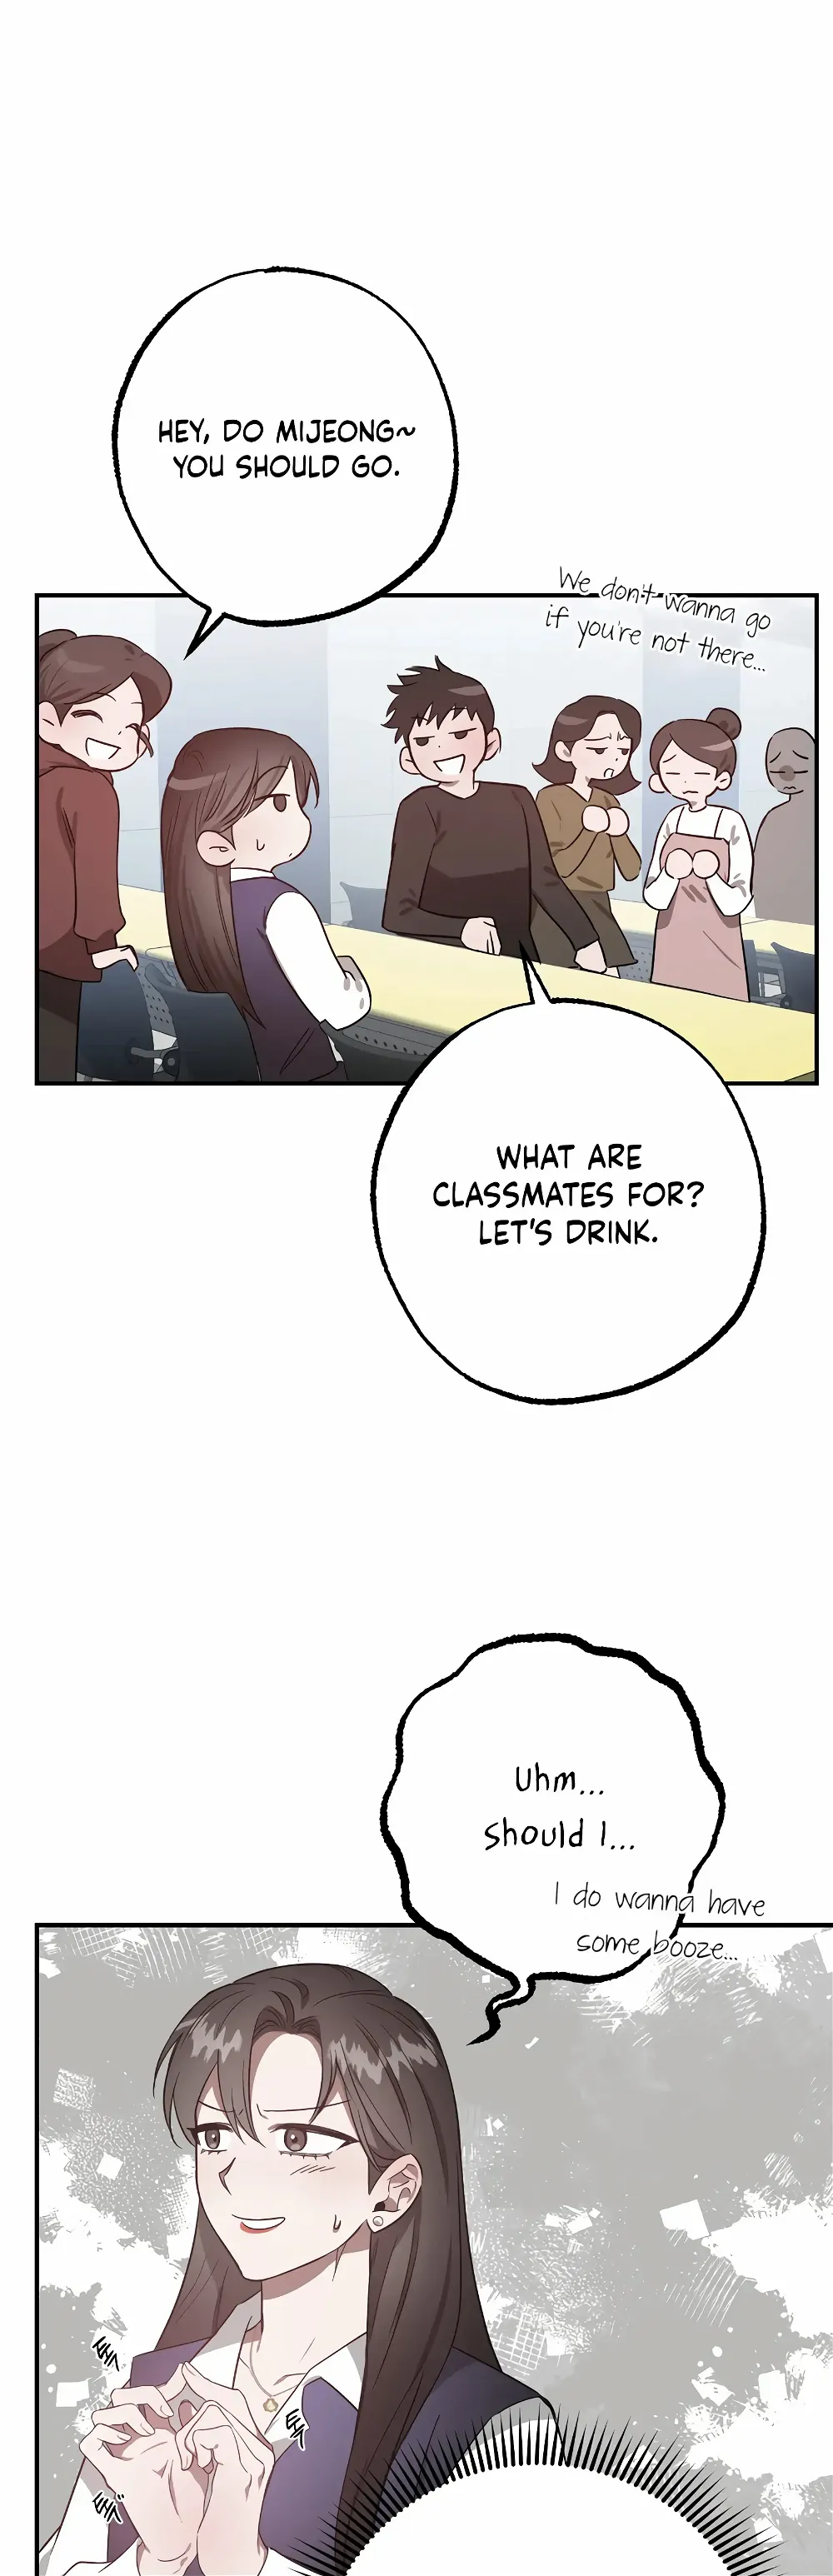 Mijeong’s Relationships chapter 9 - Page 26